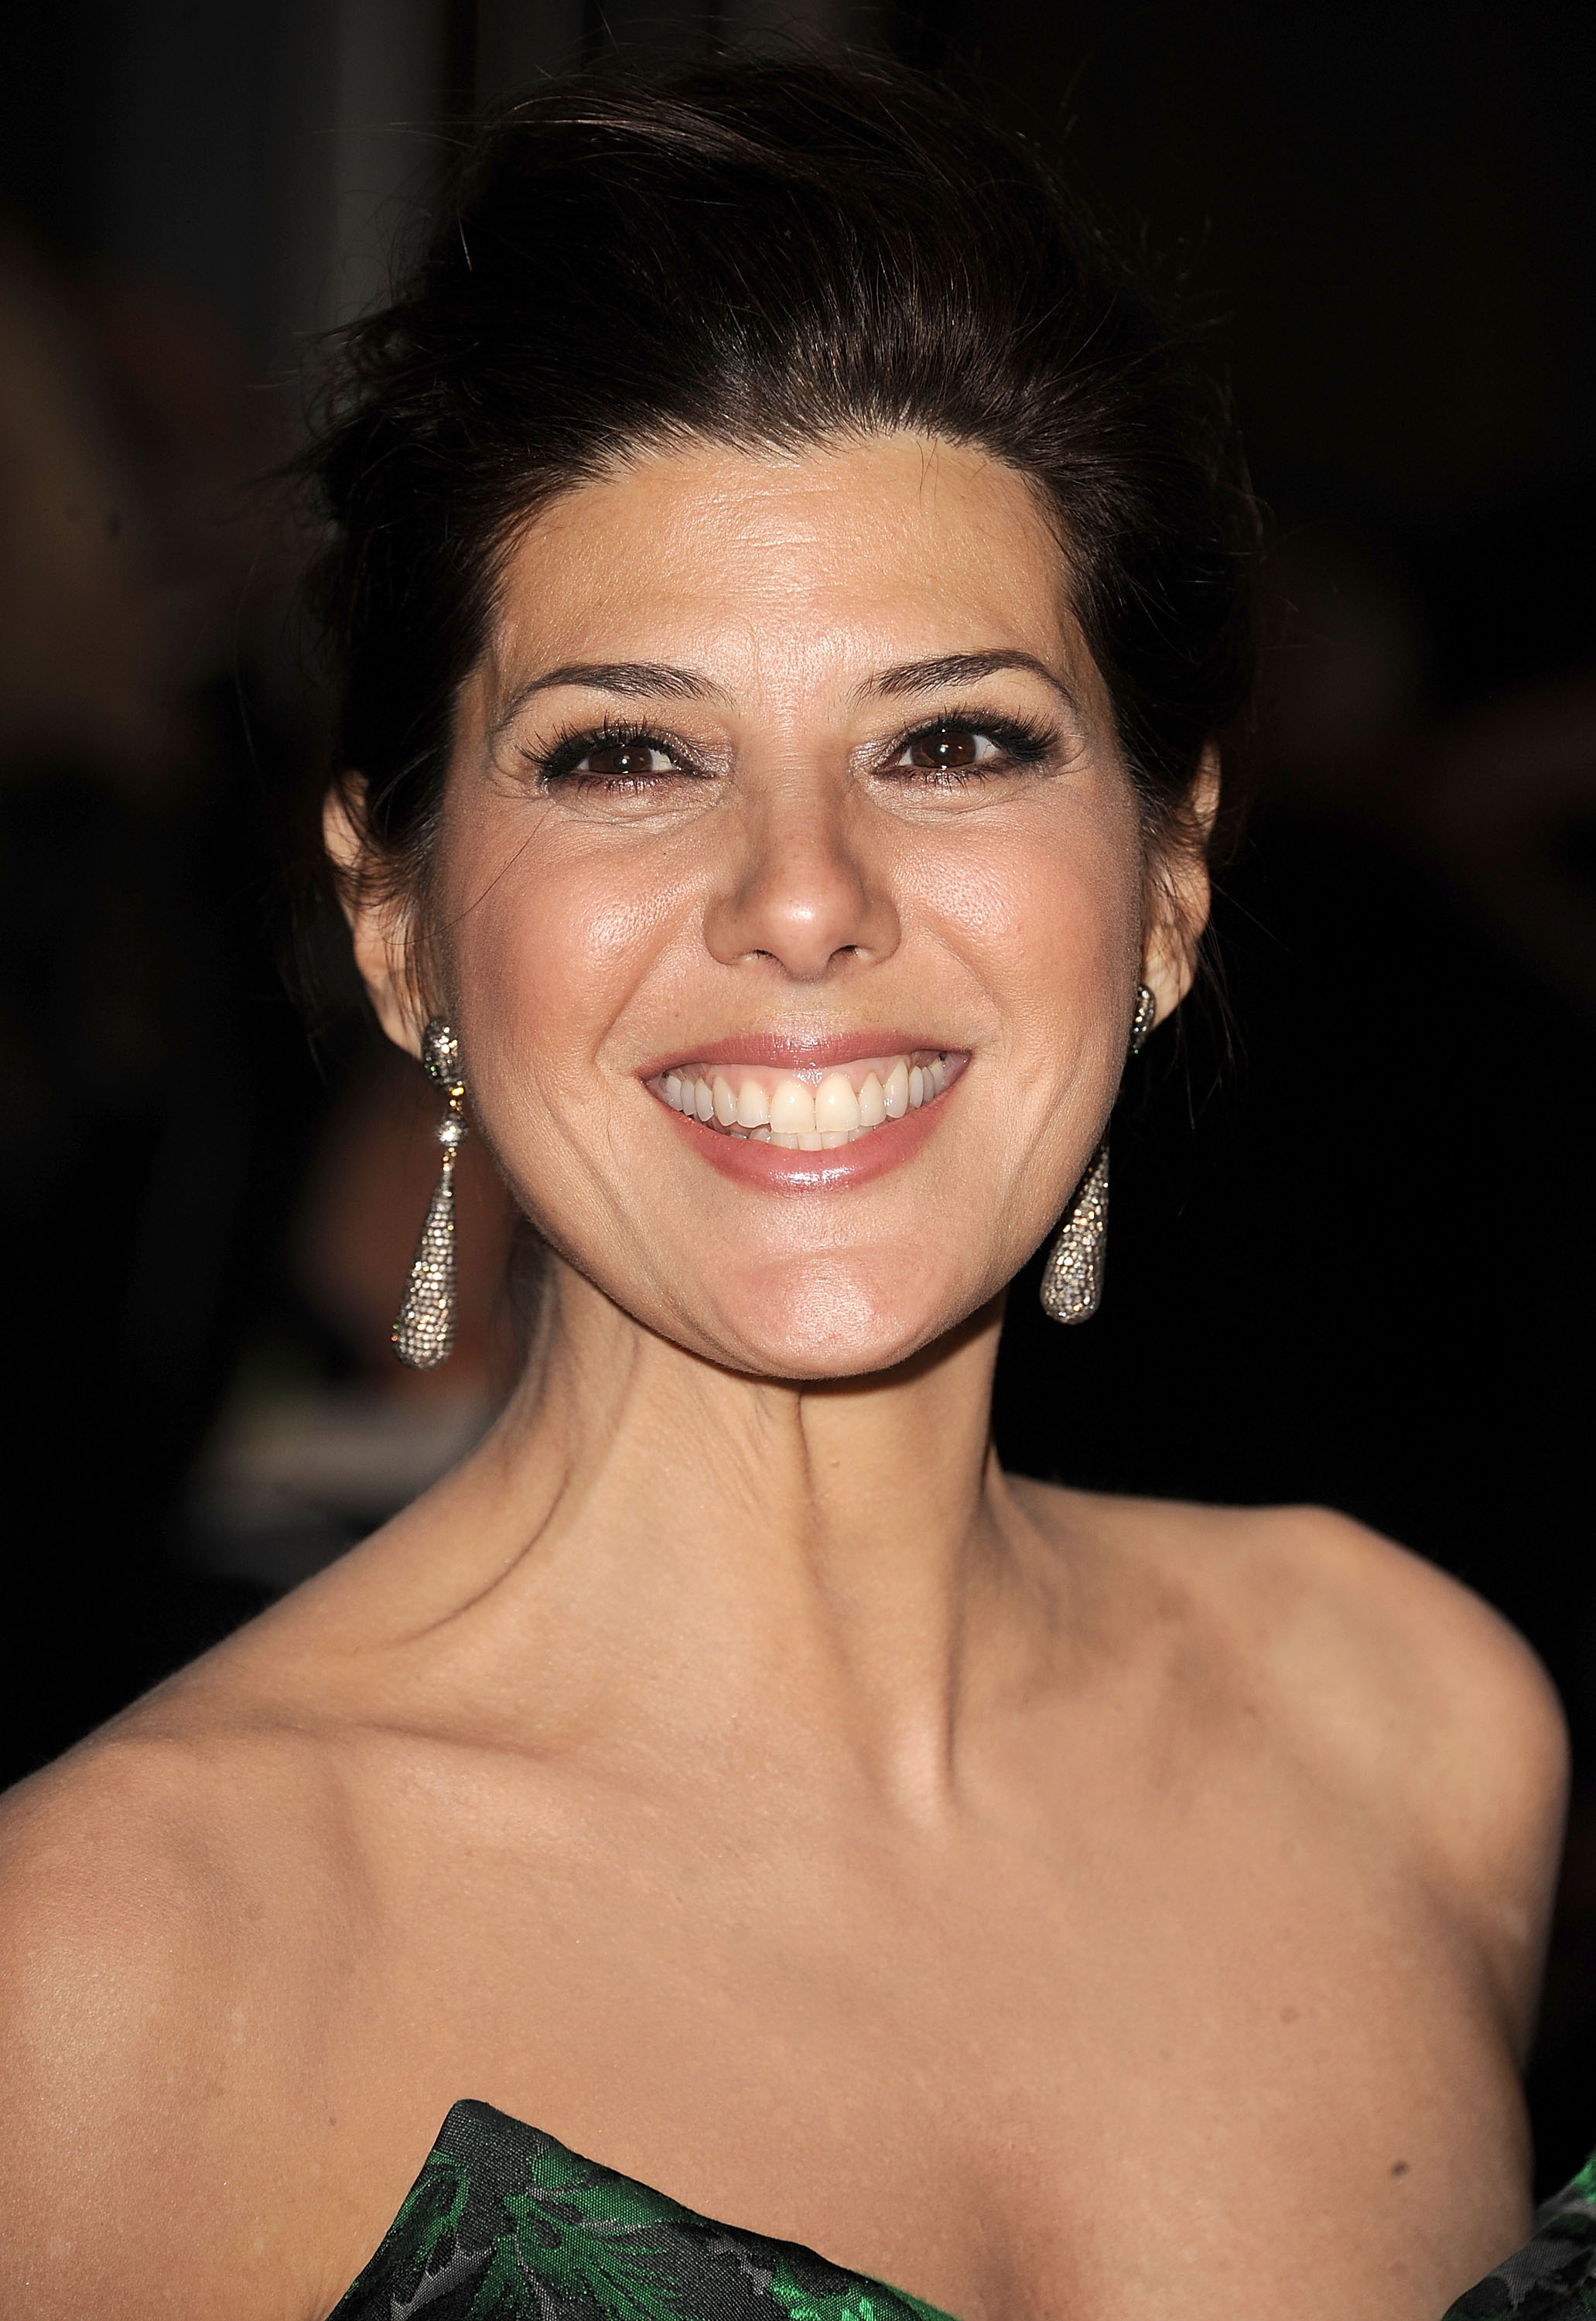 AMPAS 2nd Annual Governors Awards - Marisa Tomei Photo (33307410) - Fanpop